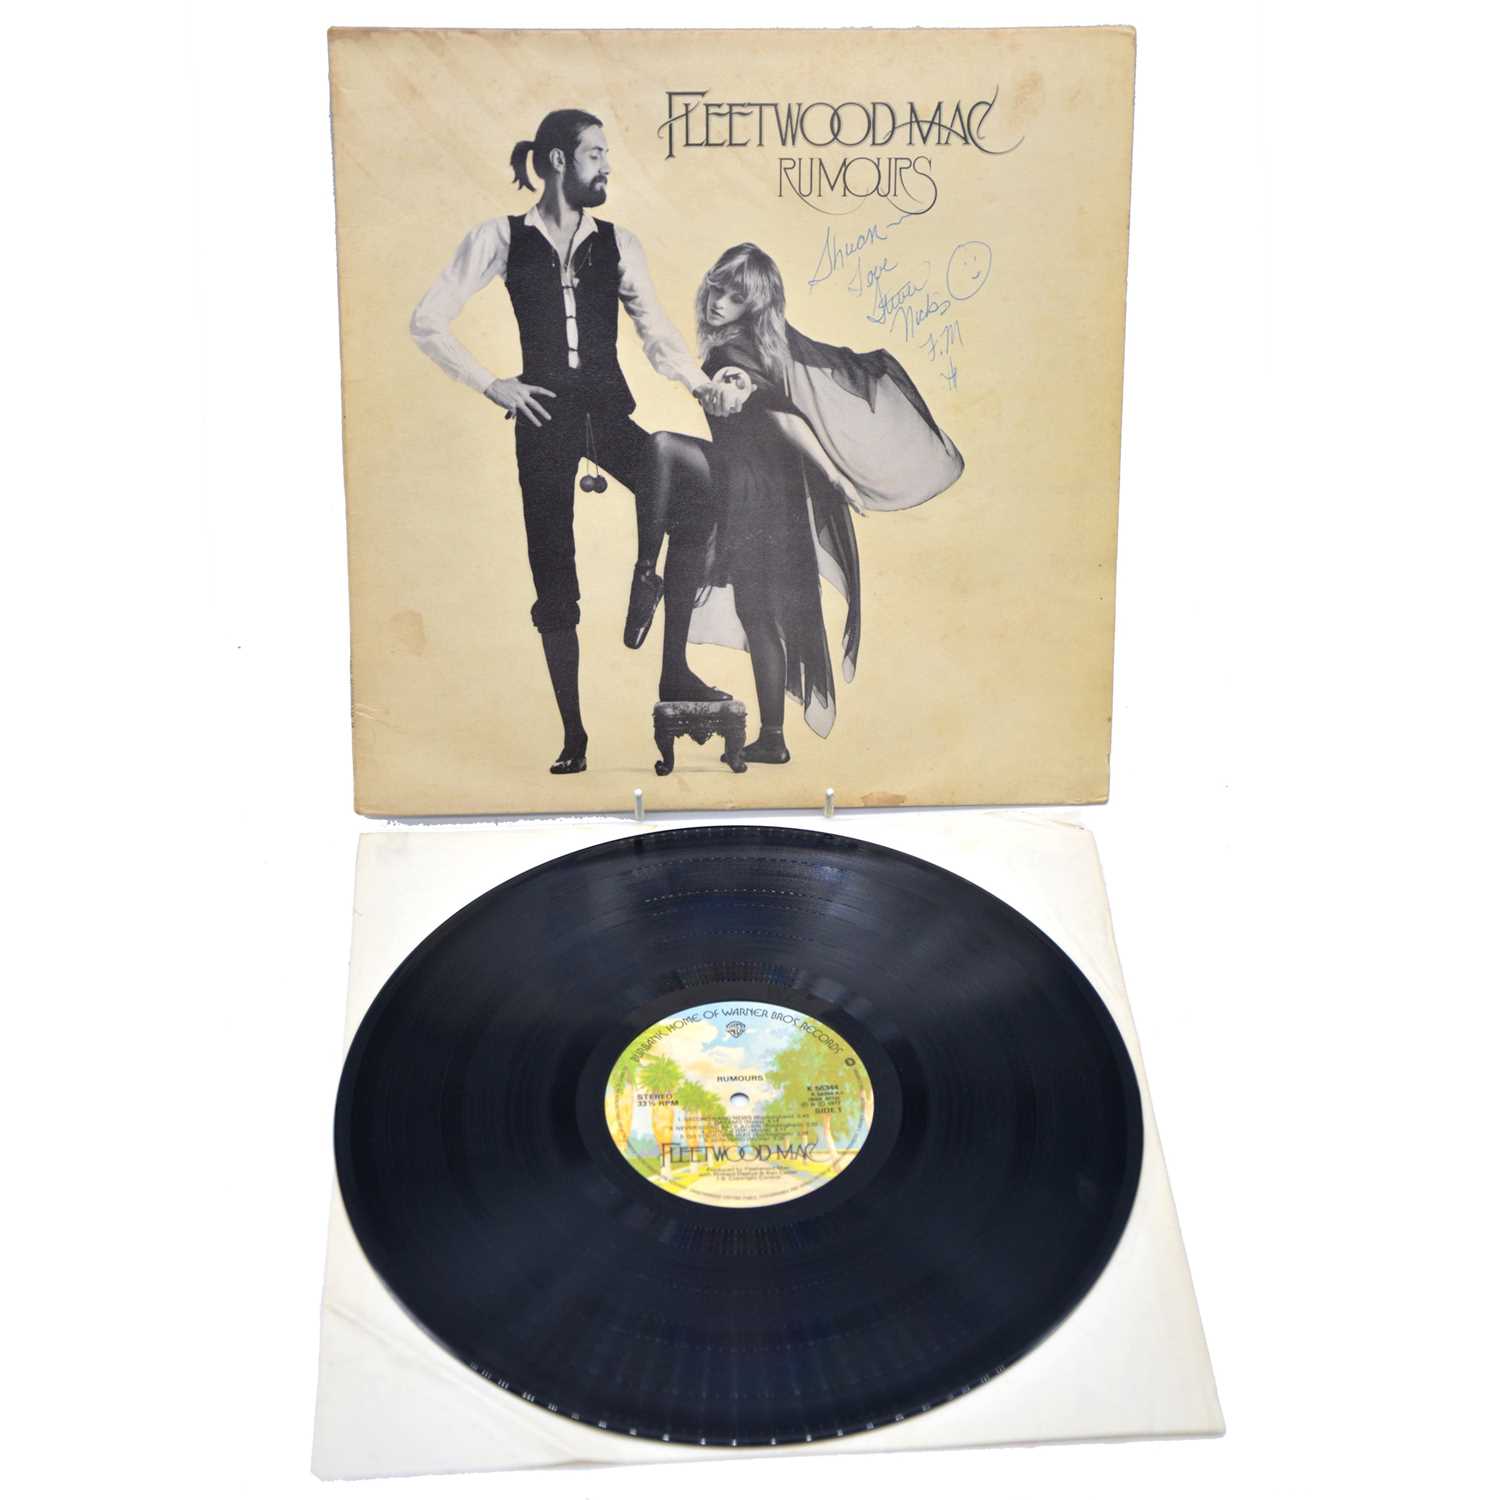 Lot 10 - Fleetwood Mac LP vinyl record, Rumours, cover signed by Stevie Nicks.